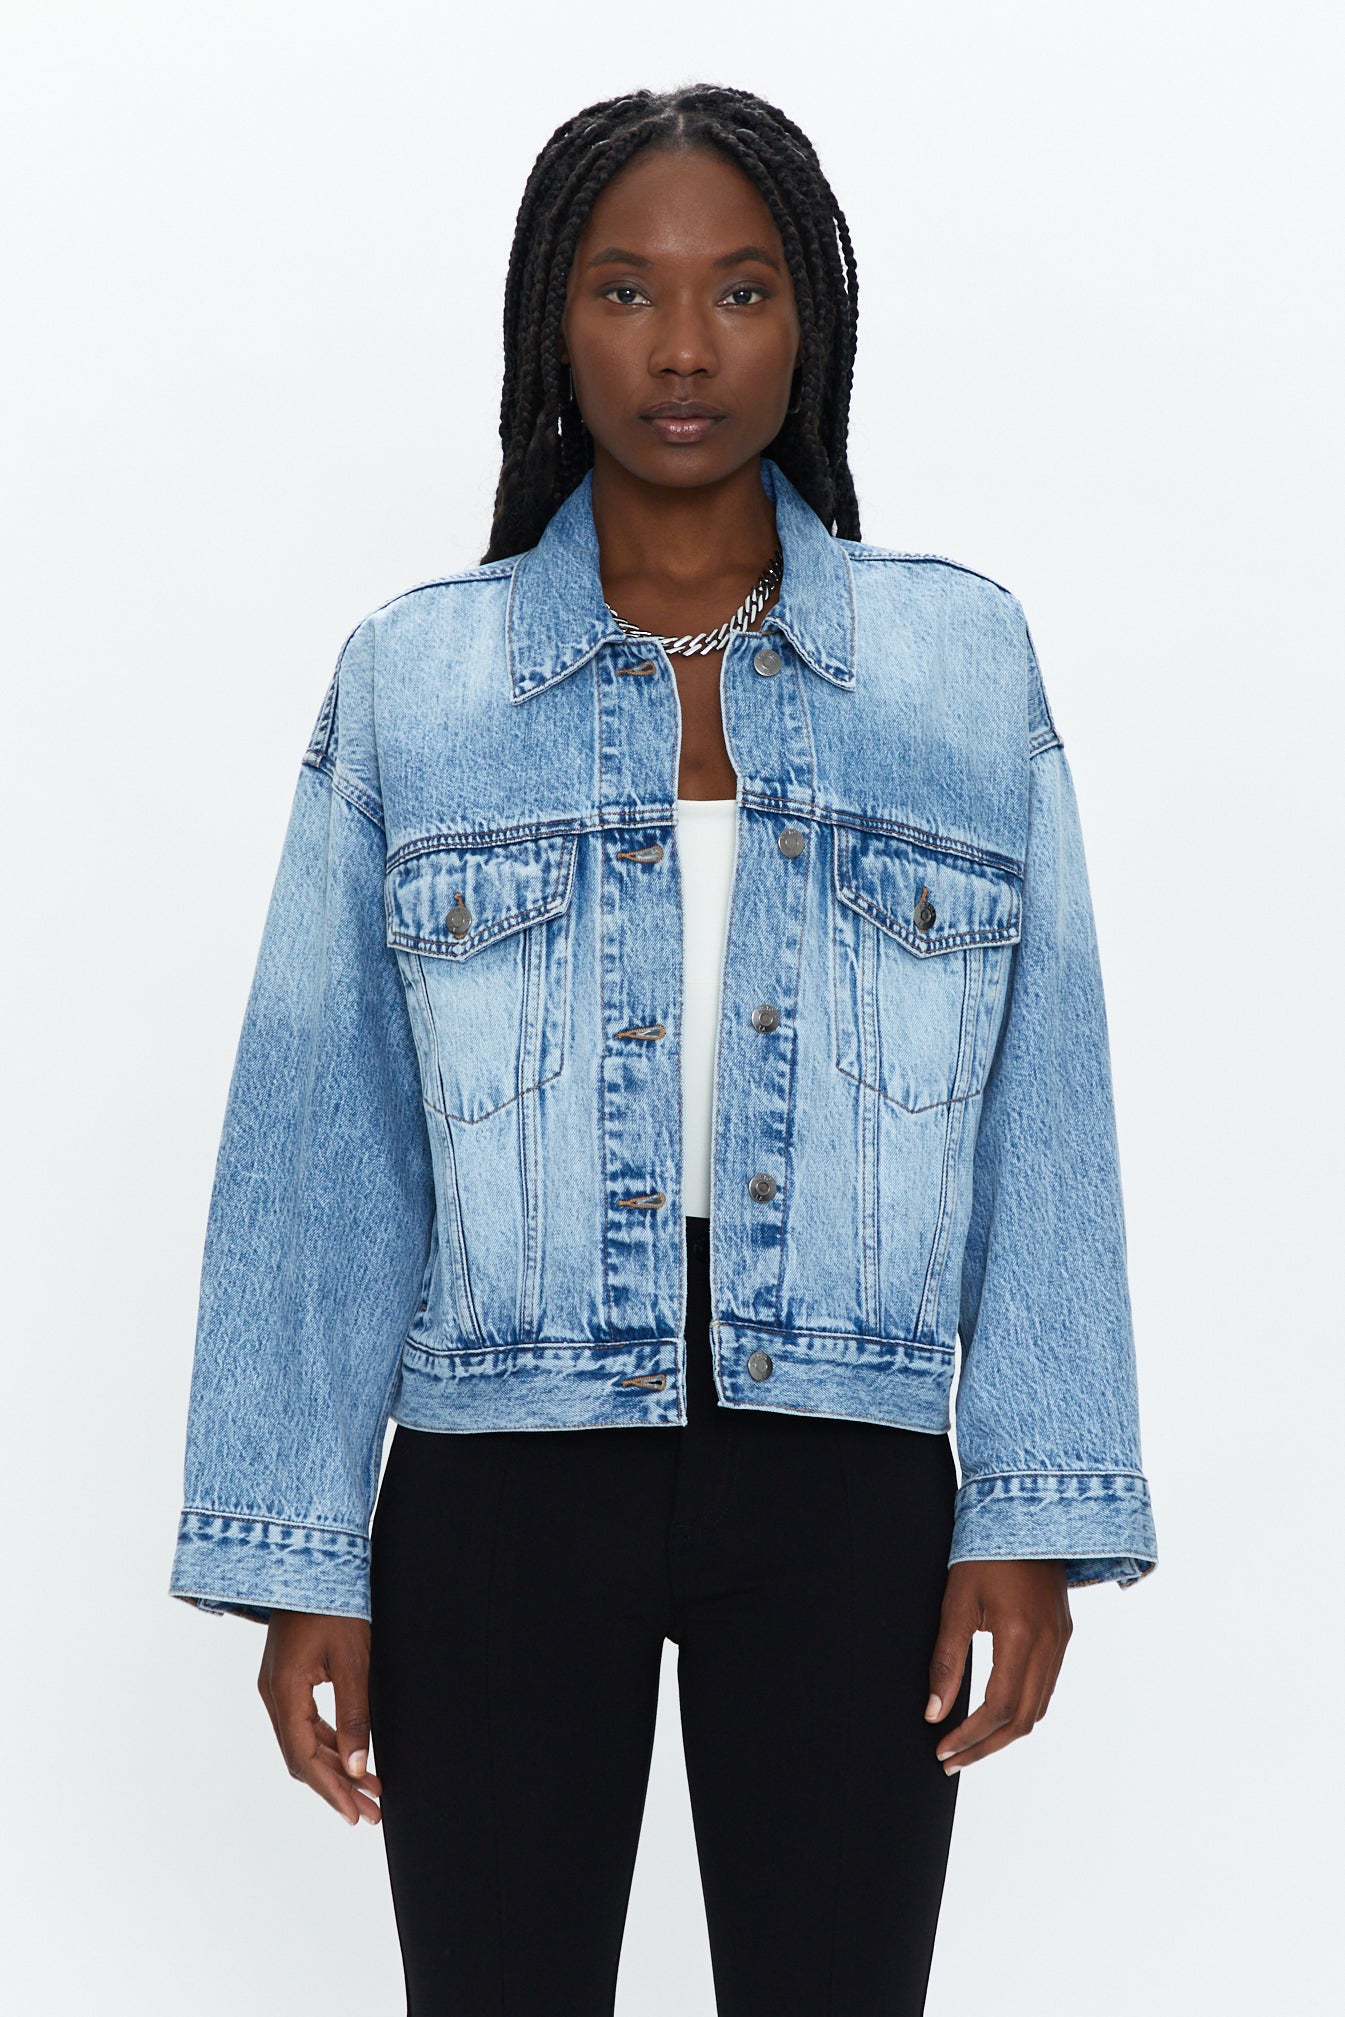 Shades Of You Black Oversized Distressed Denim Jacket – Pink Lily